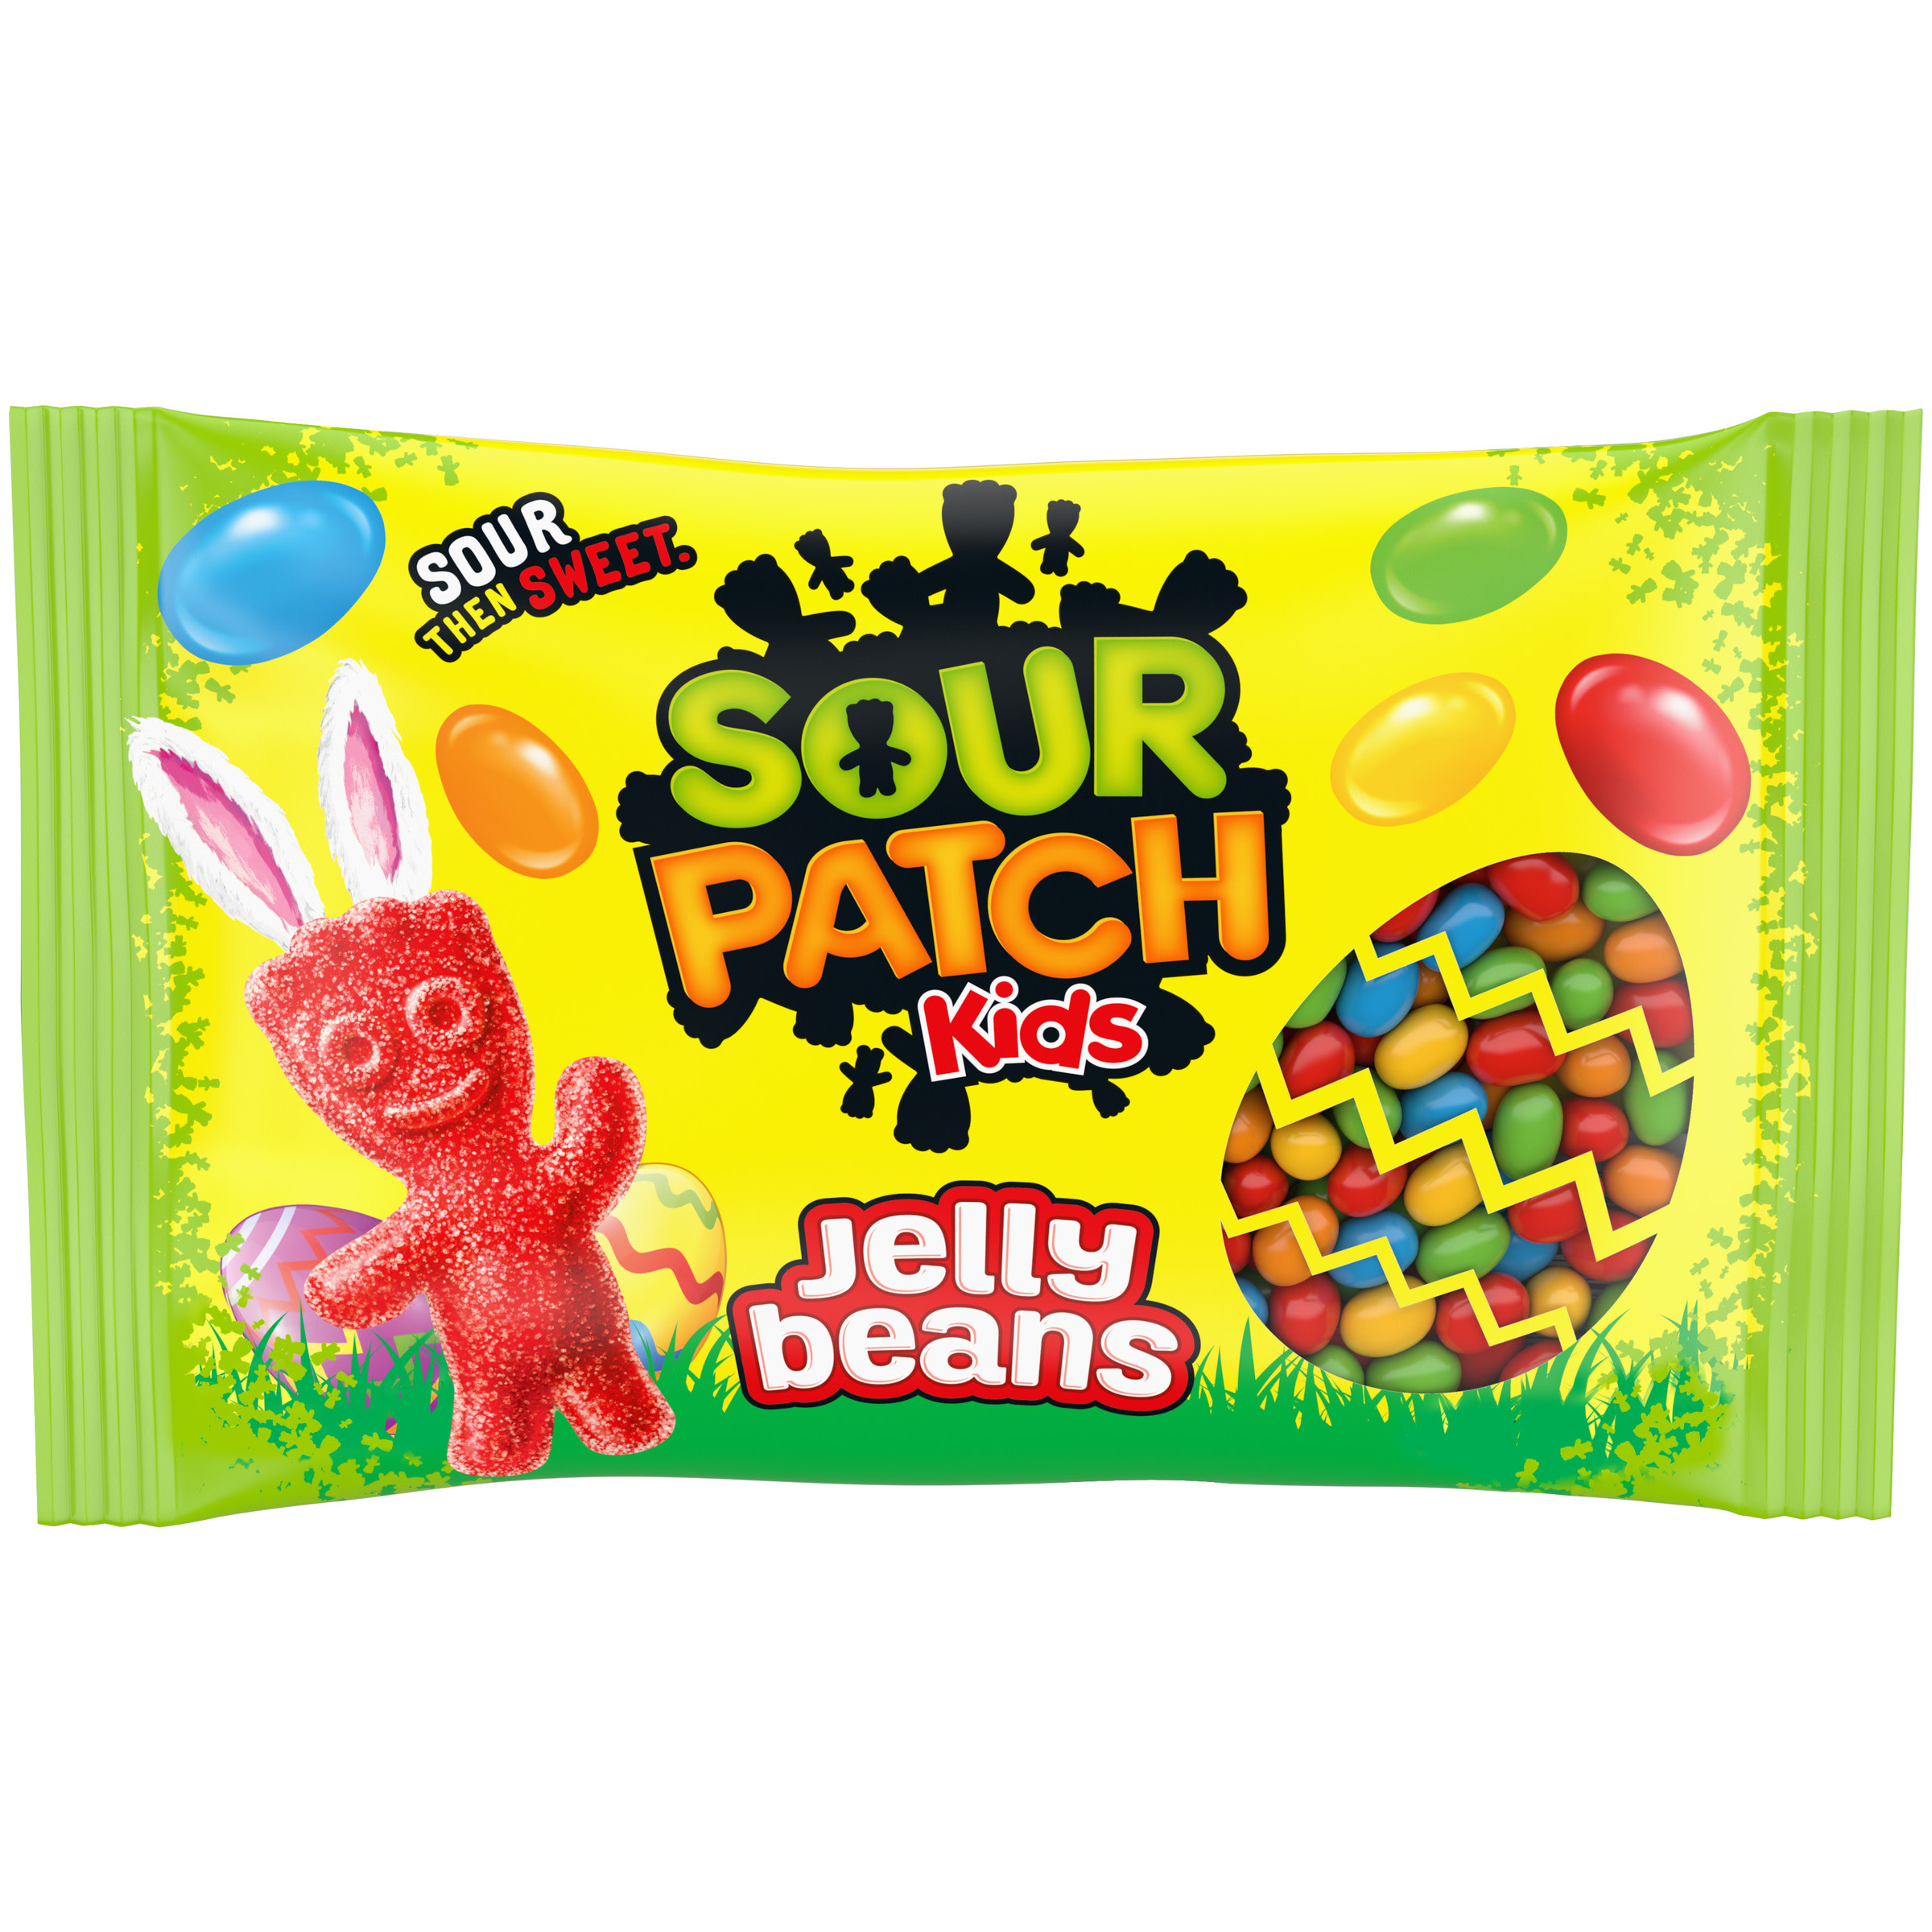 SOUR PATCH KIDS Jelly Beans, Easter Candy, 13 oz - image 1 of 12